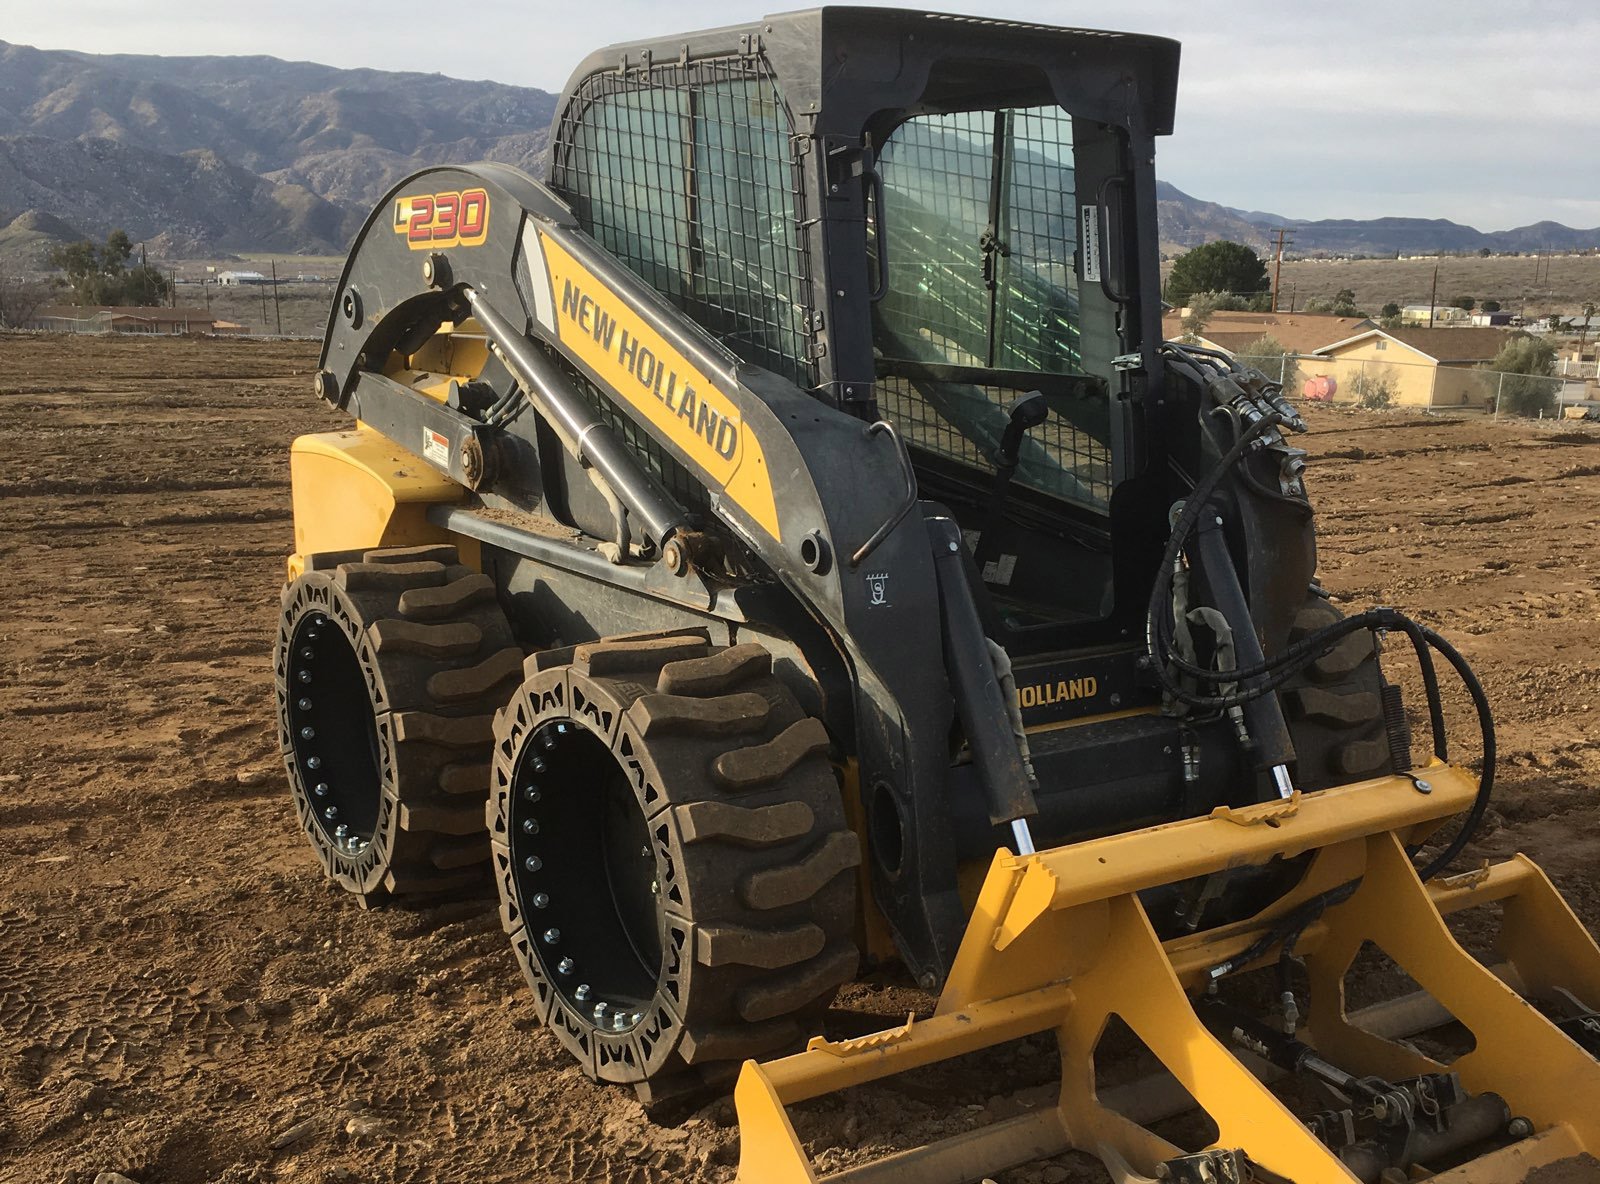 This image is about a yellow New Holland skid steer using our Bobcat all terrain skid steer tires